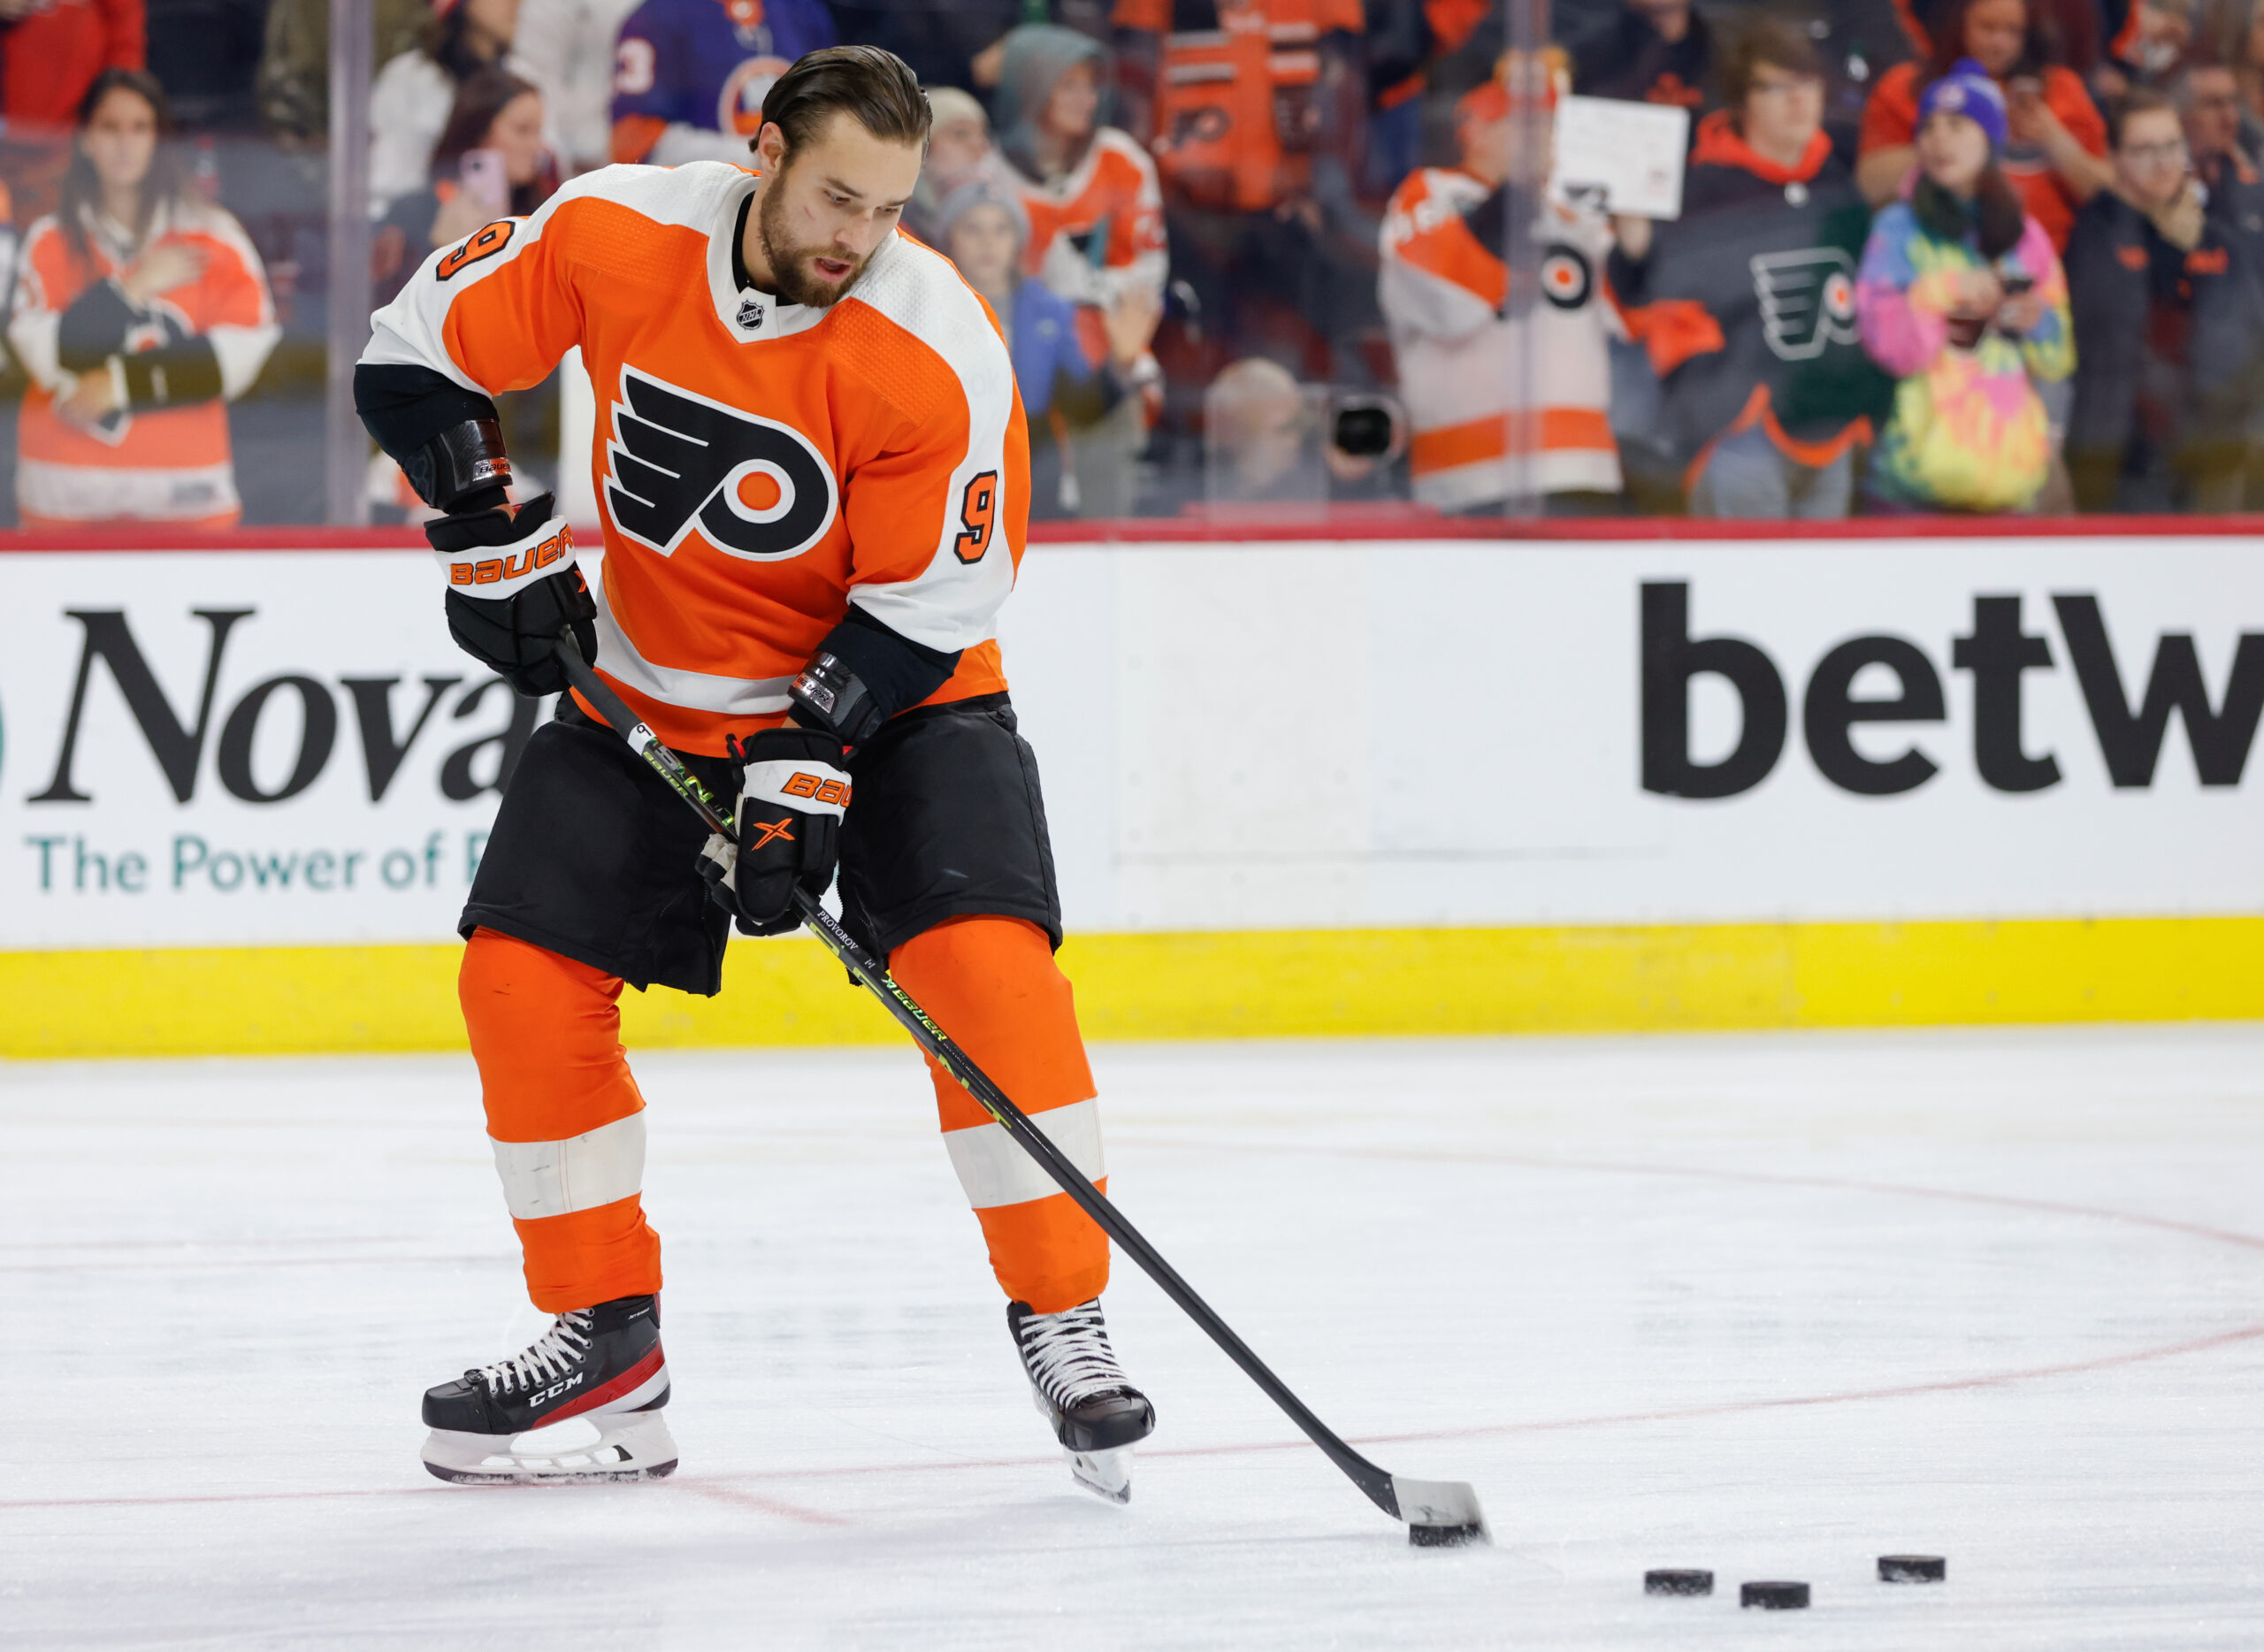 Ivan Provorov jersey sells out after Pride night controversy - Deseret